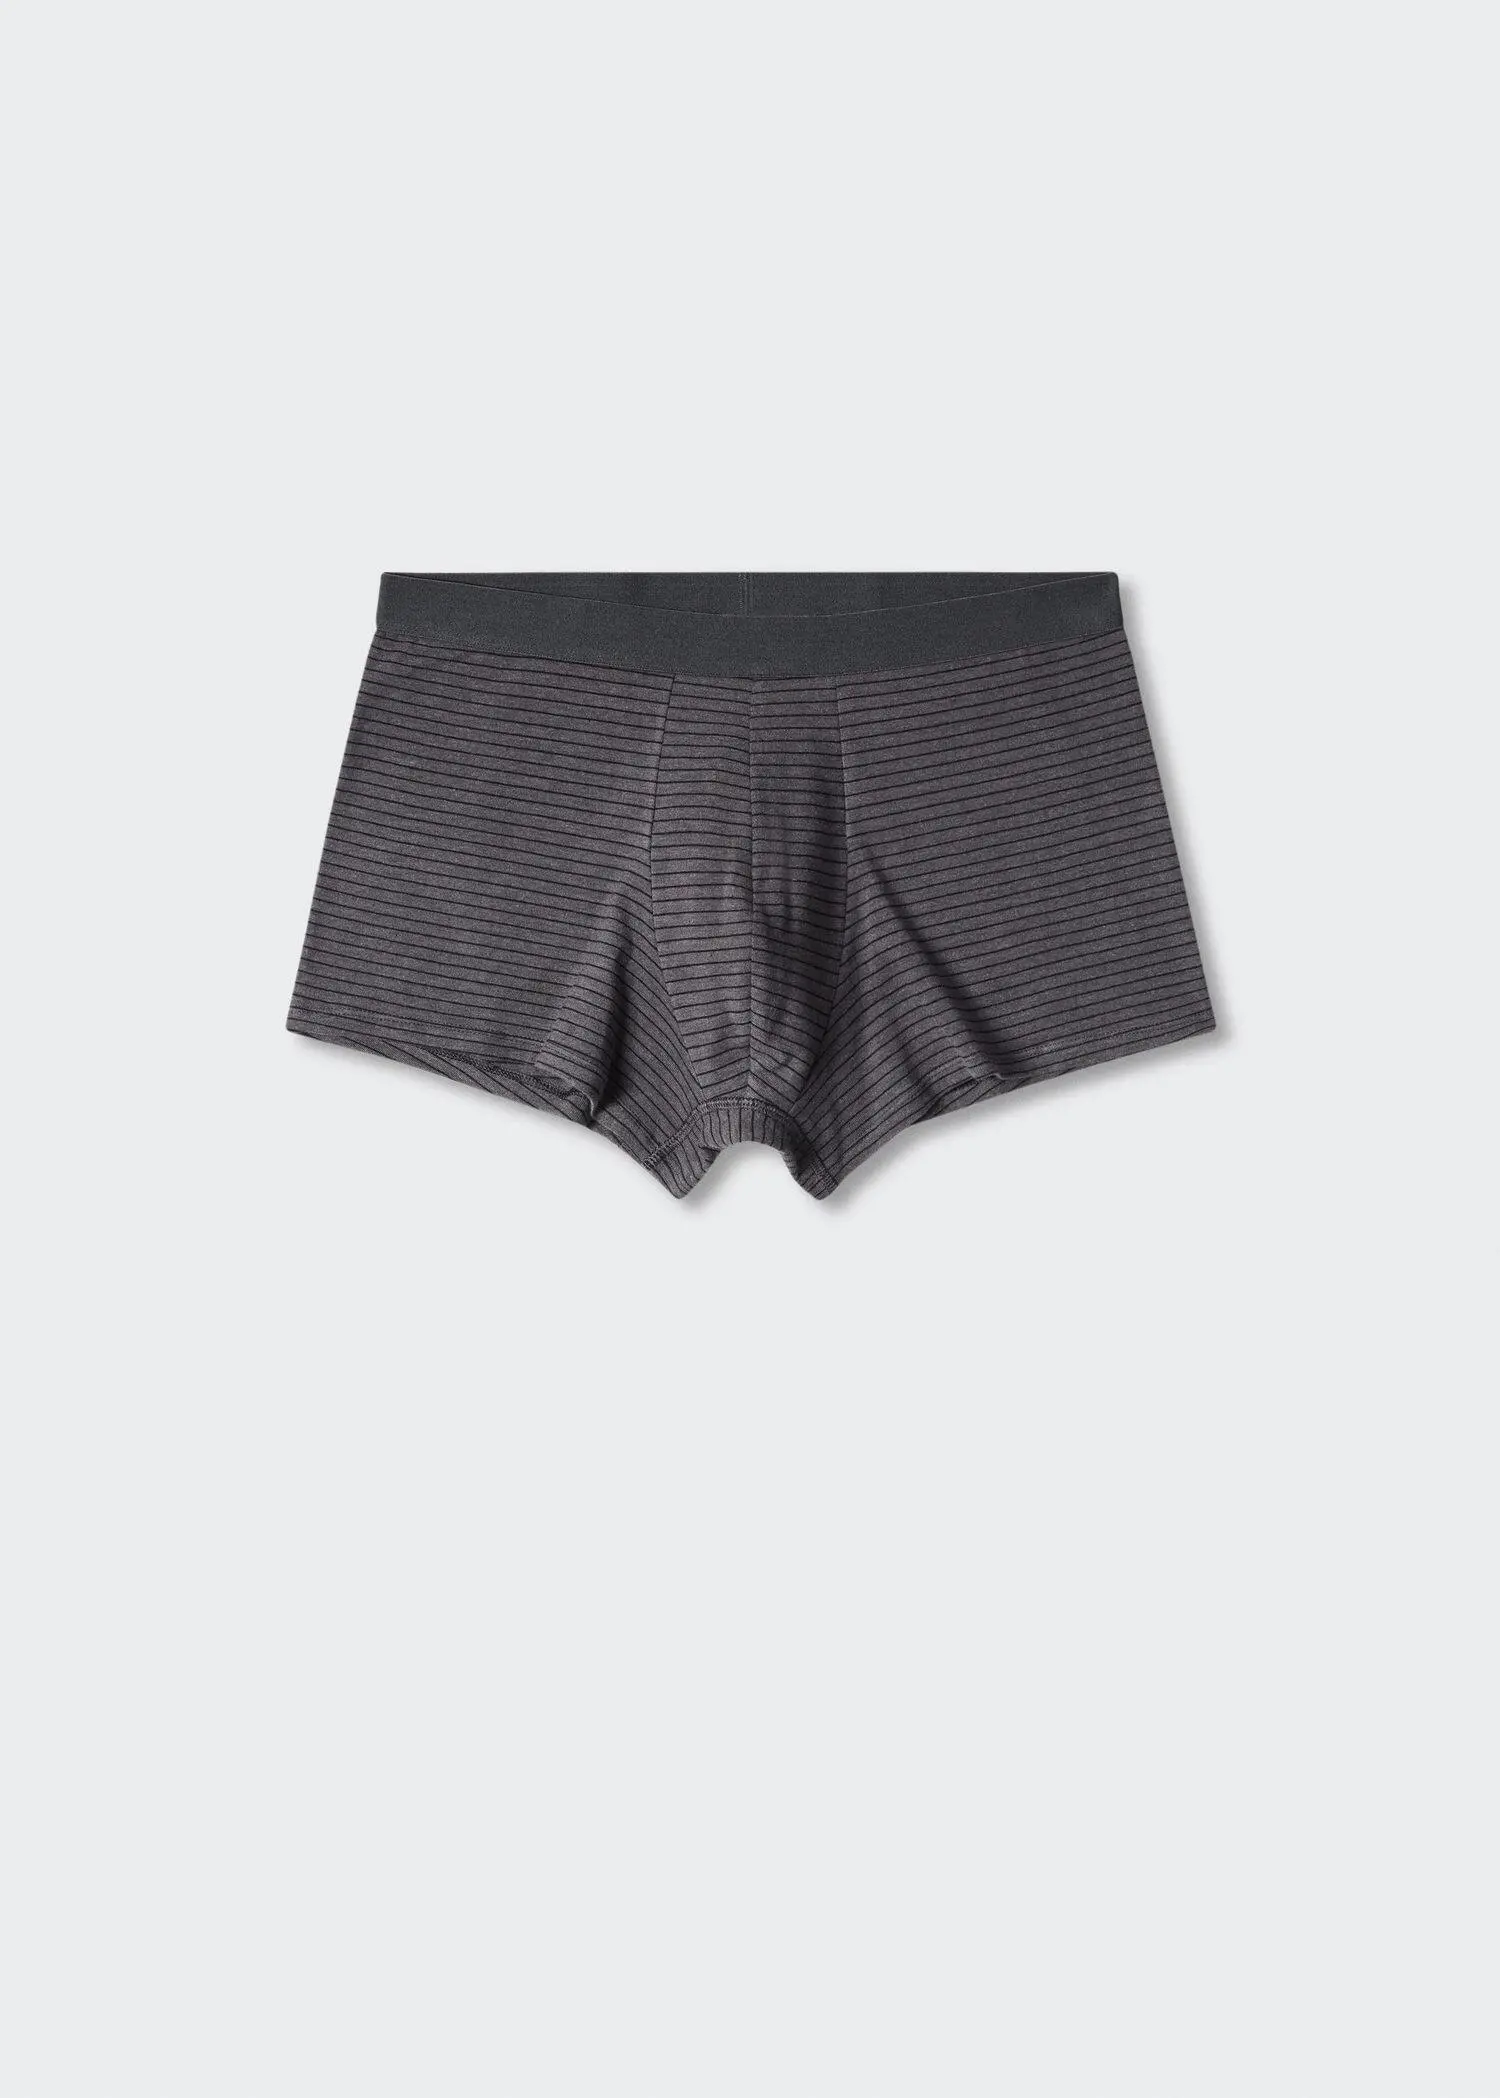 Mango Basic boxer 2 pack. a pair of black and white striped boxers. 